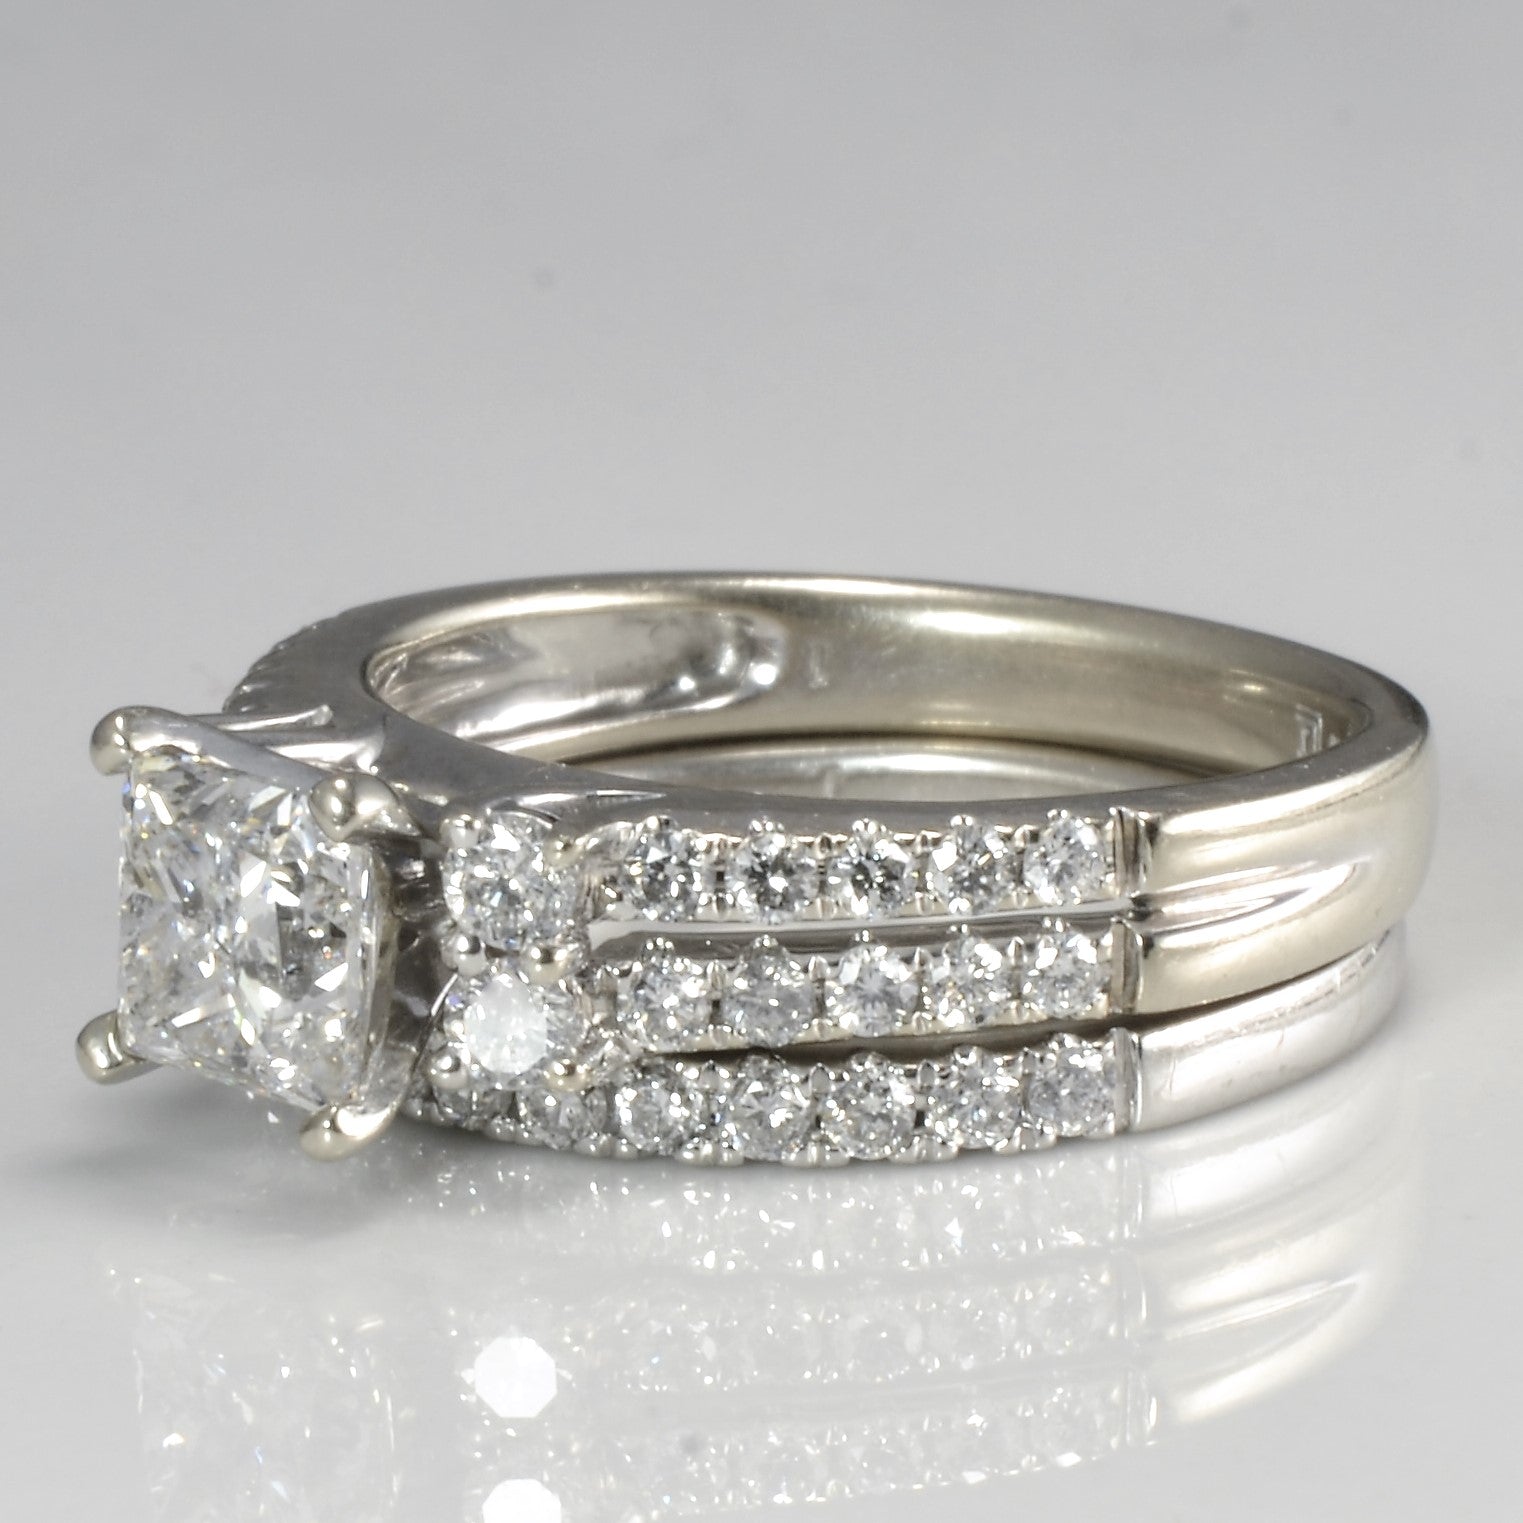 High Set Diamond with Accents Engagement Ring Set | 1.61 ctw, SZ 7 |